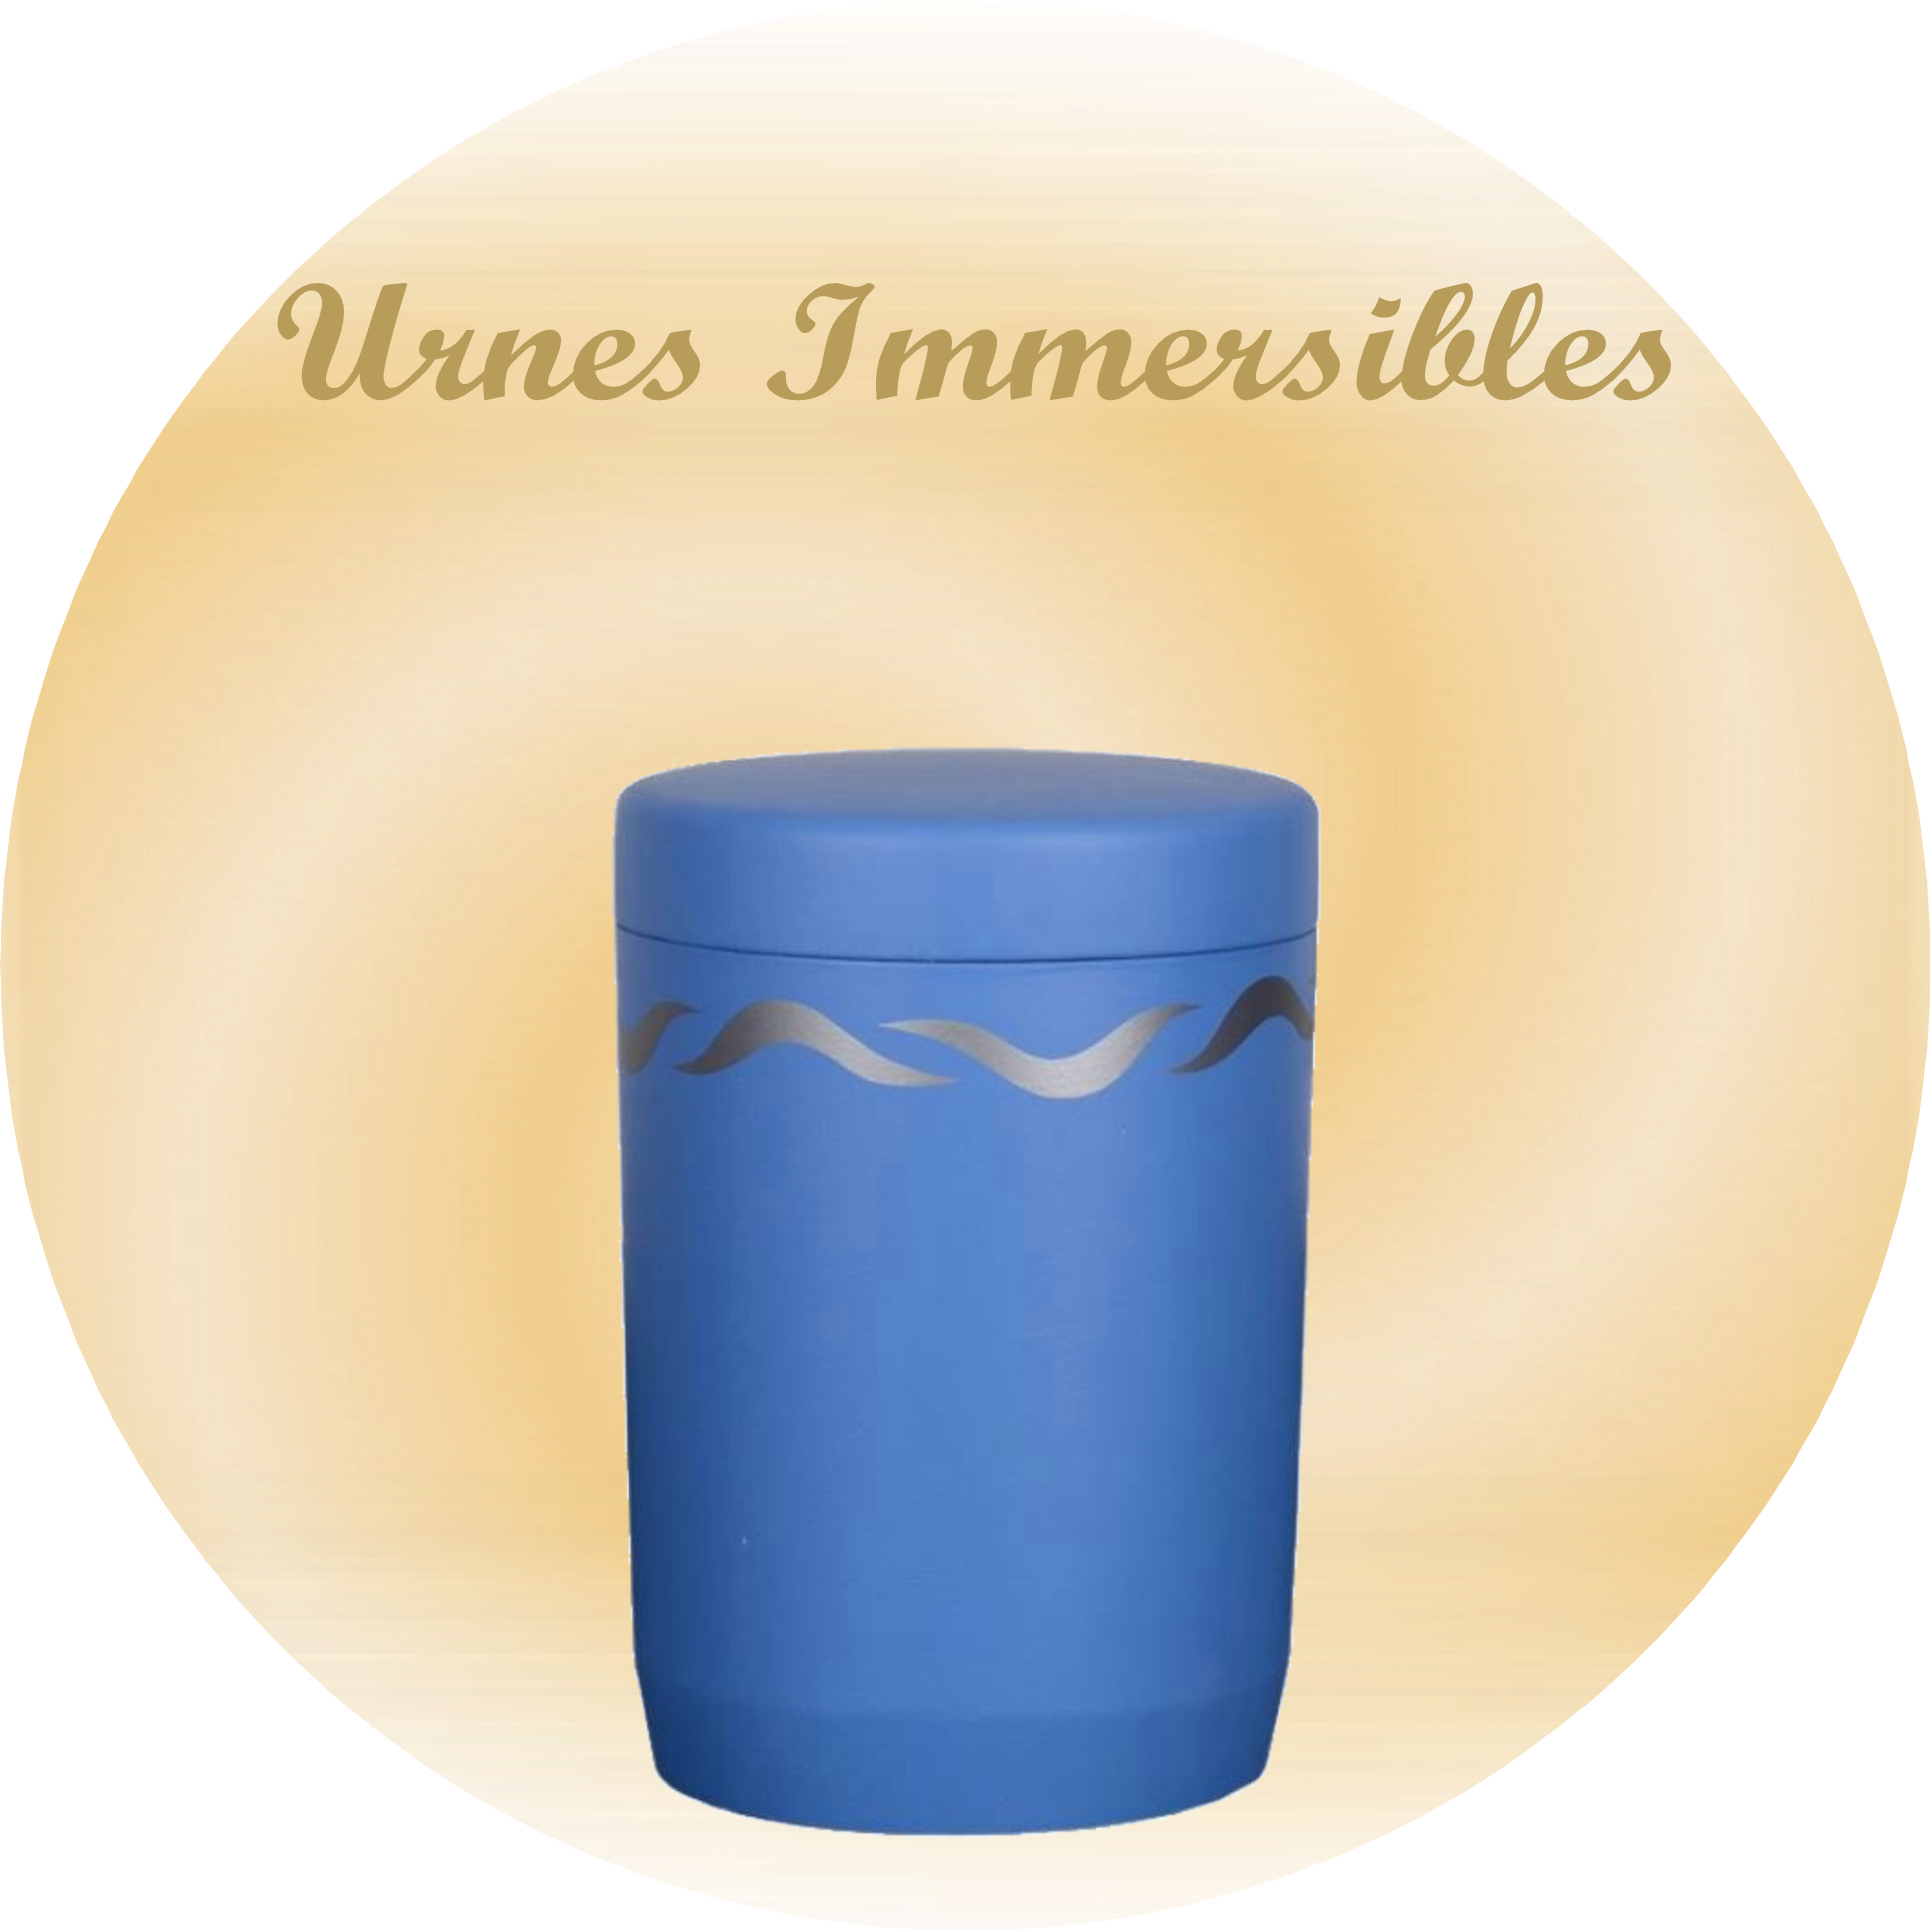 URNE FUNERAIRE IMMERSIBLE BEZOLLES